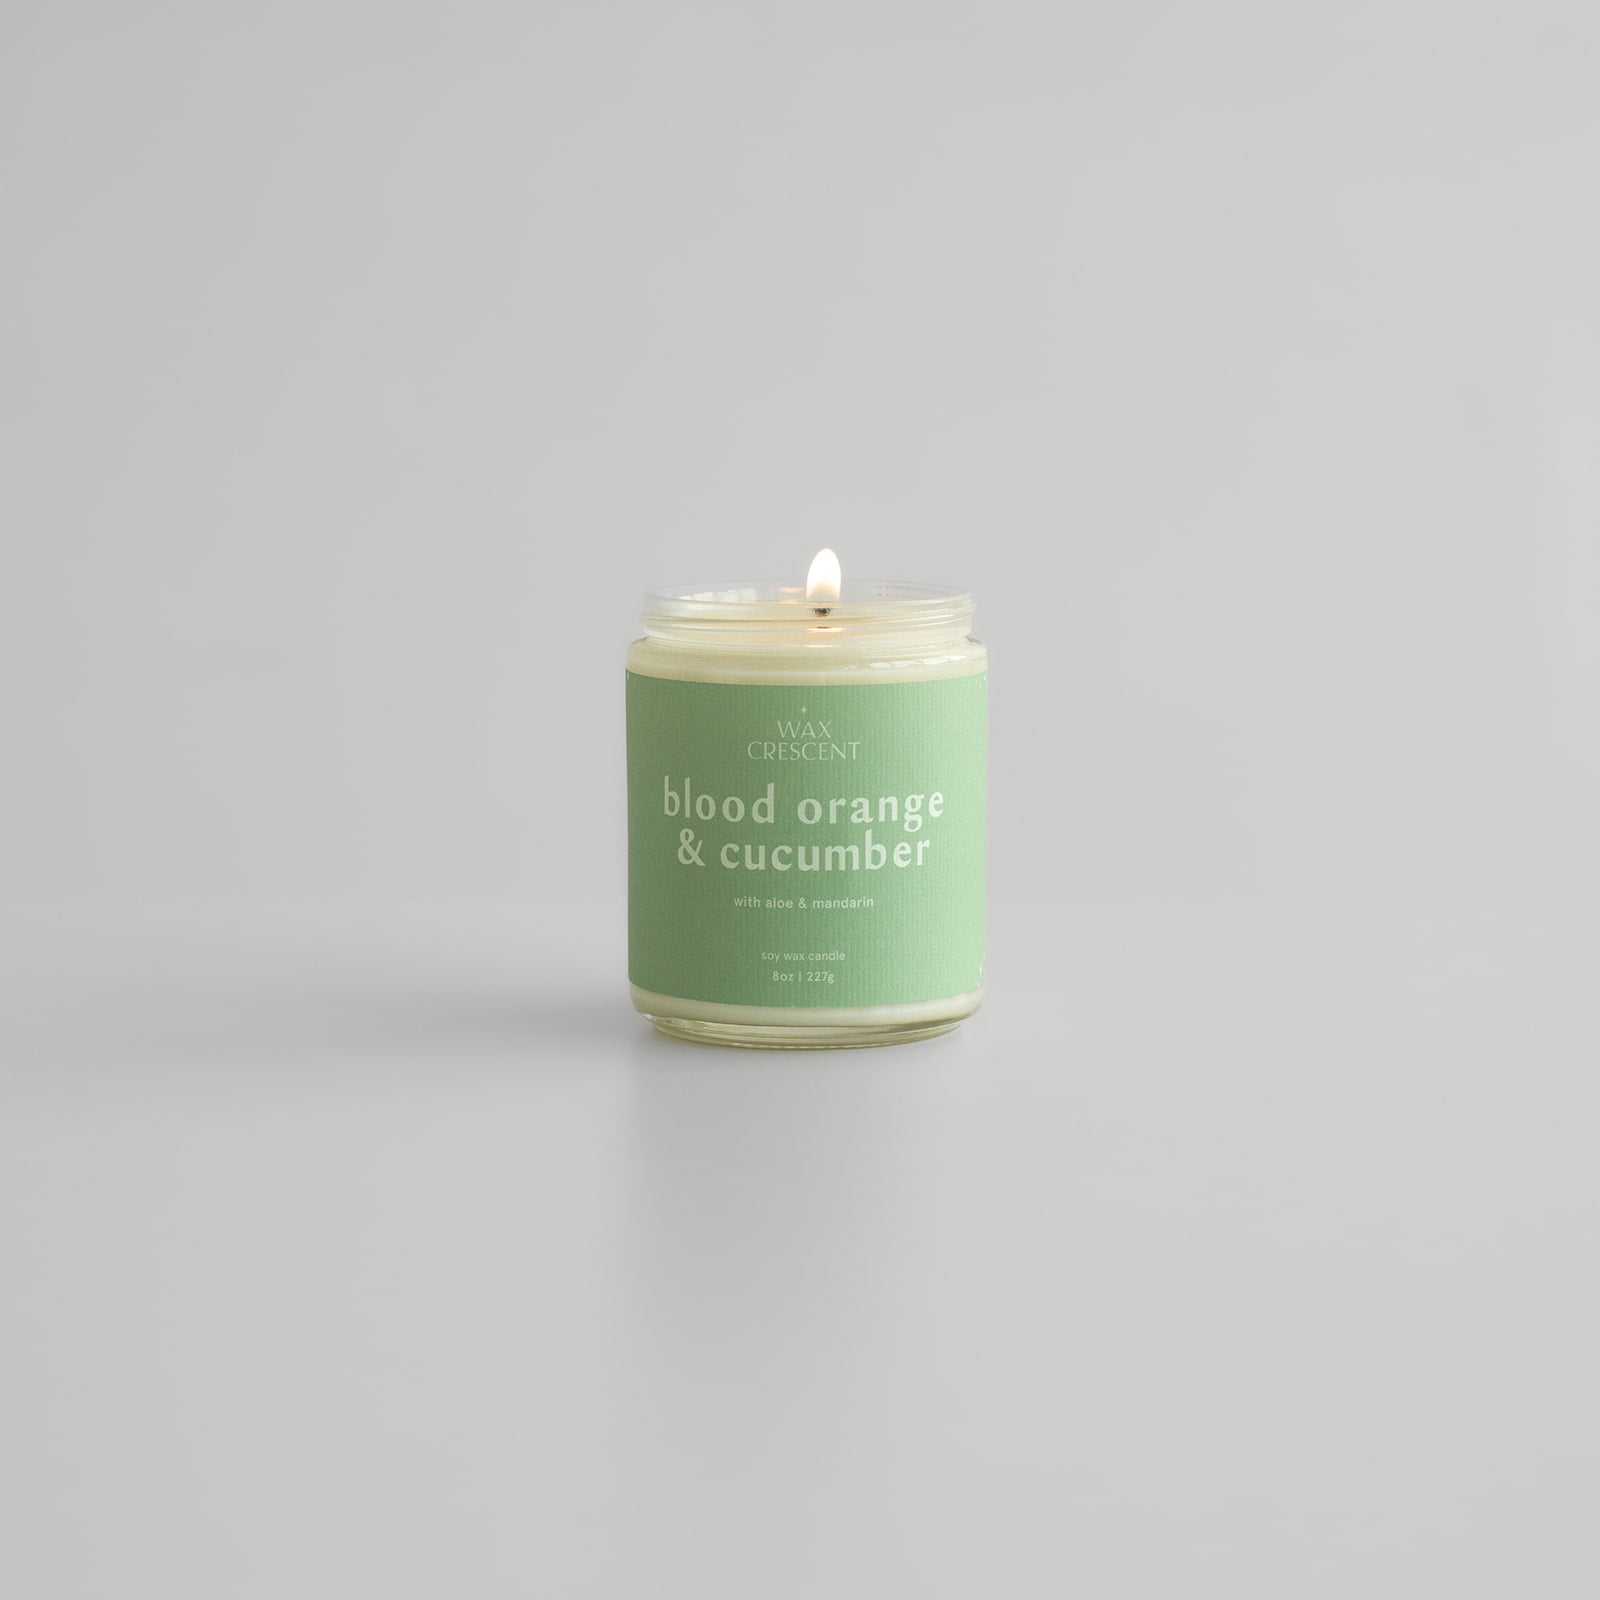 blood orange and cucumber soy wax candle image made in Longmont Colorado 